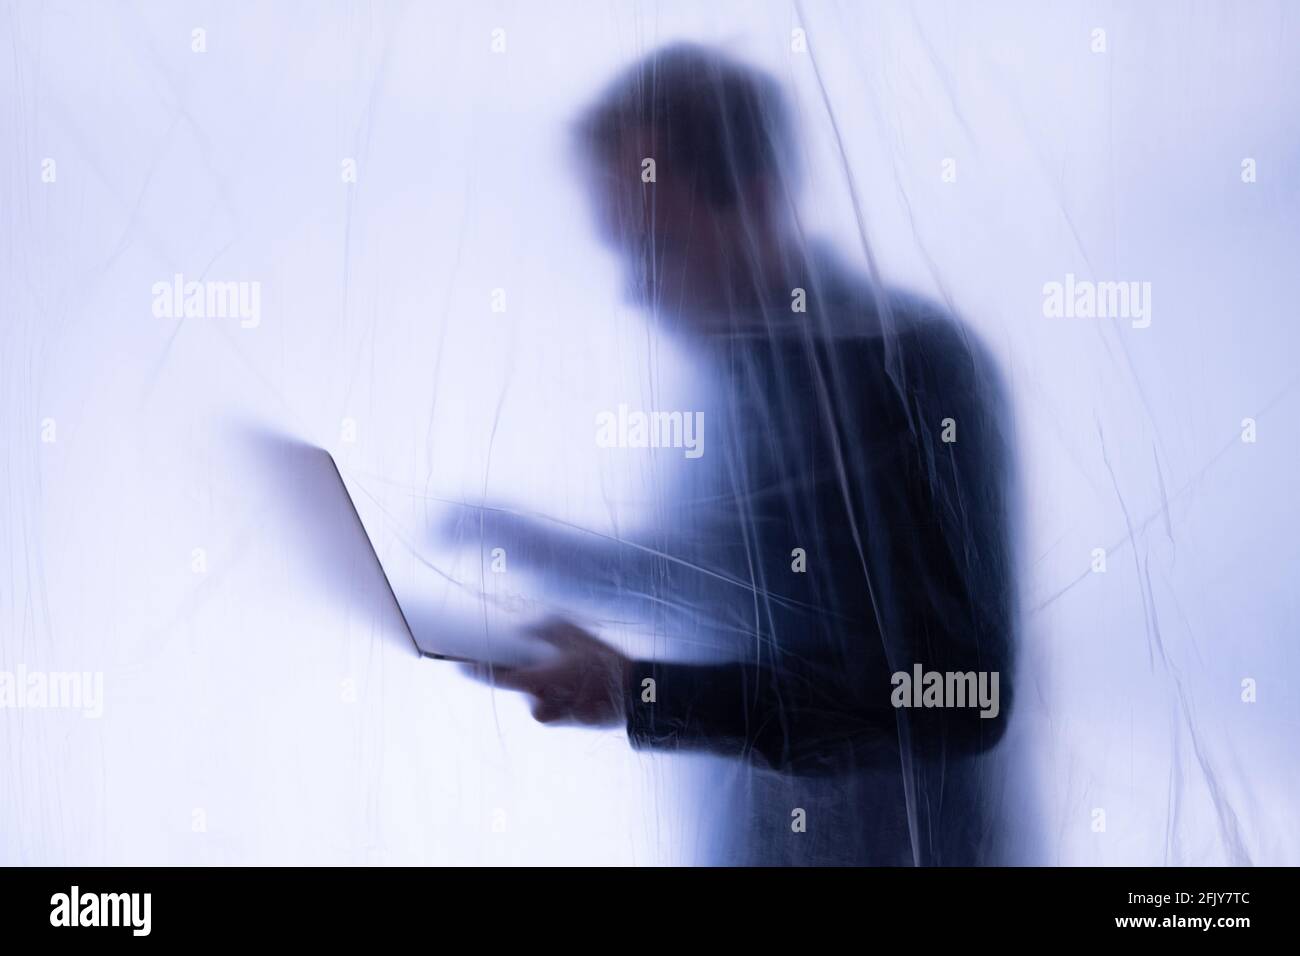 Anonymous Hacker commits computer crime Stock Photo